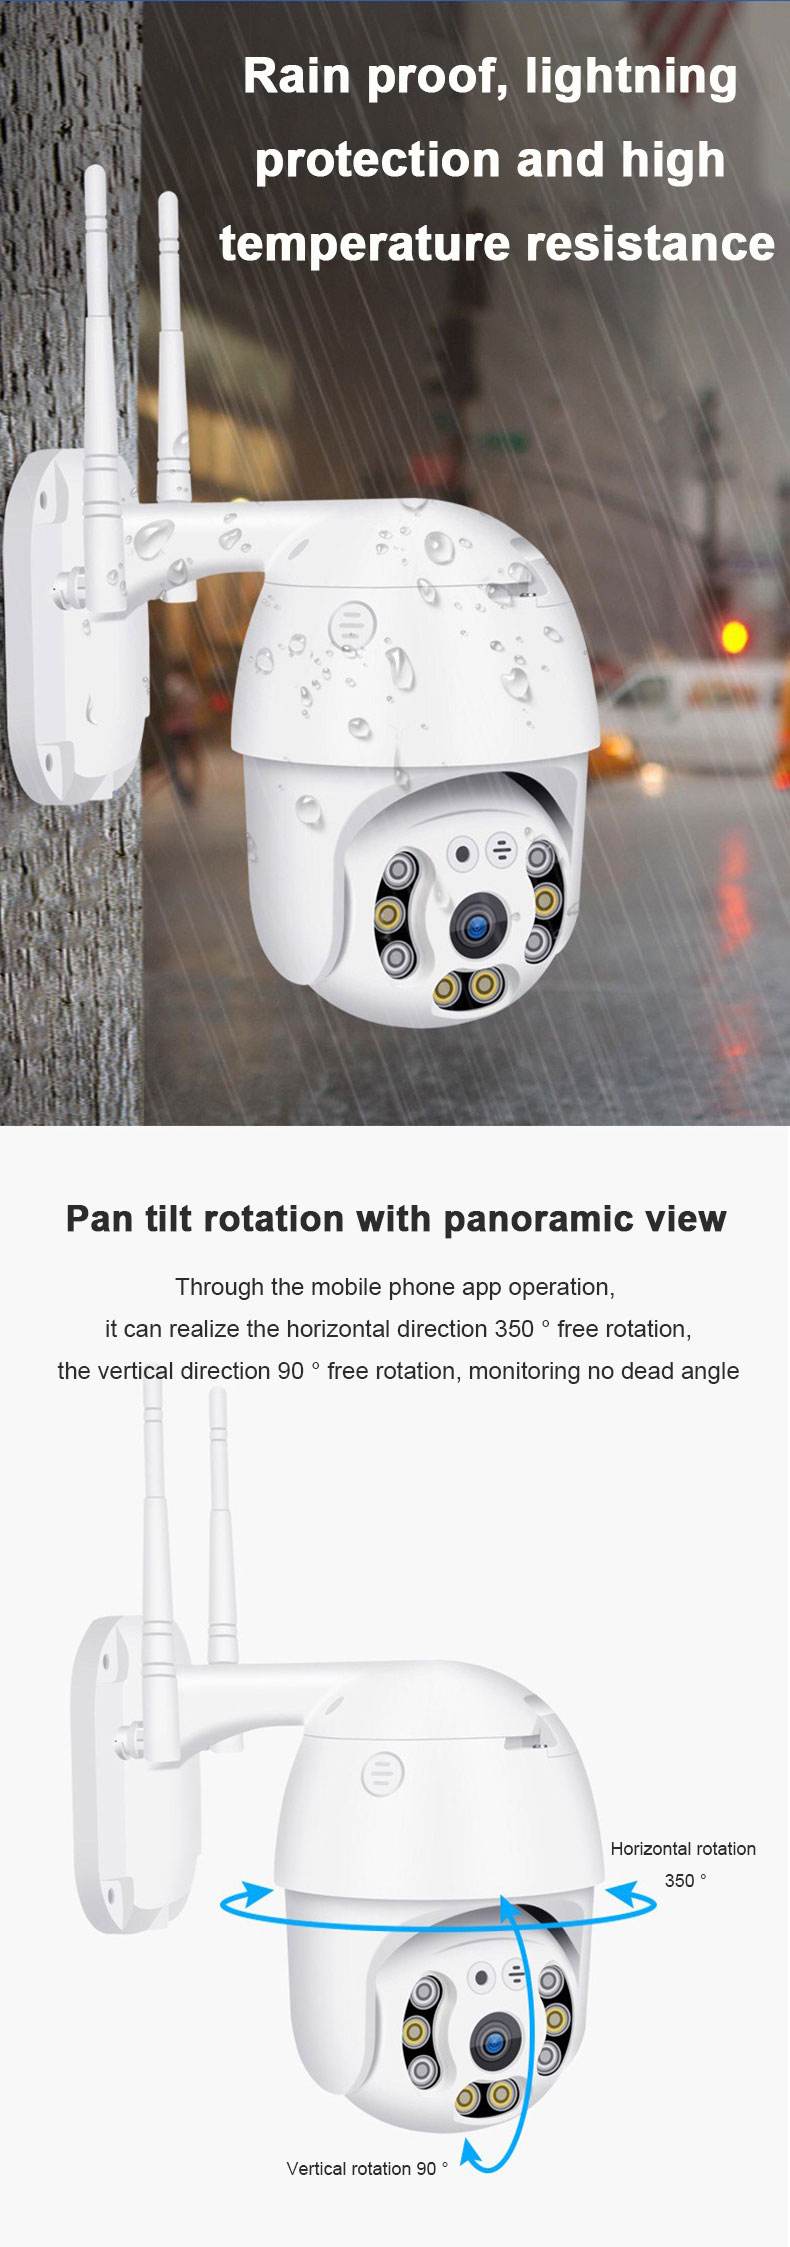 HD 1080P 1.5 inch Mini Outdoor PTZ IP Speed Dome Camera Wifi CCTV Camera Wireless Security outdoor security camera